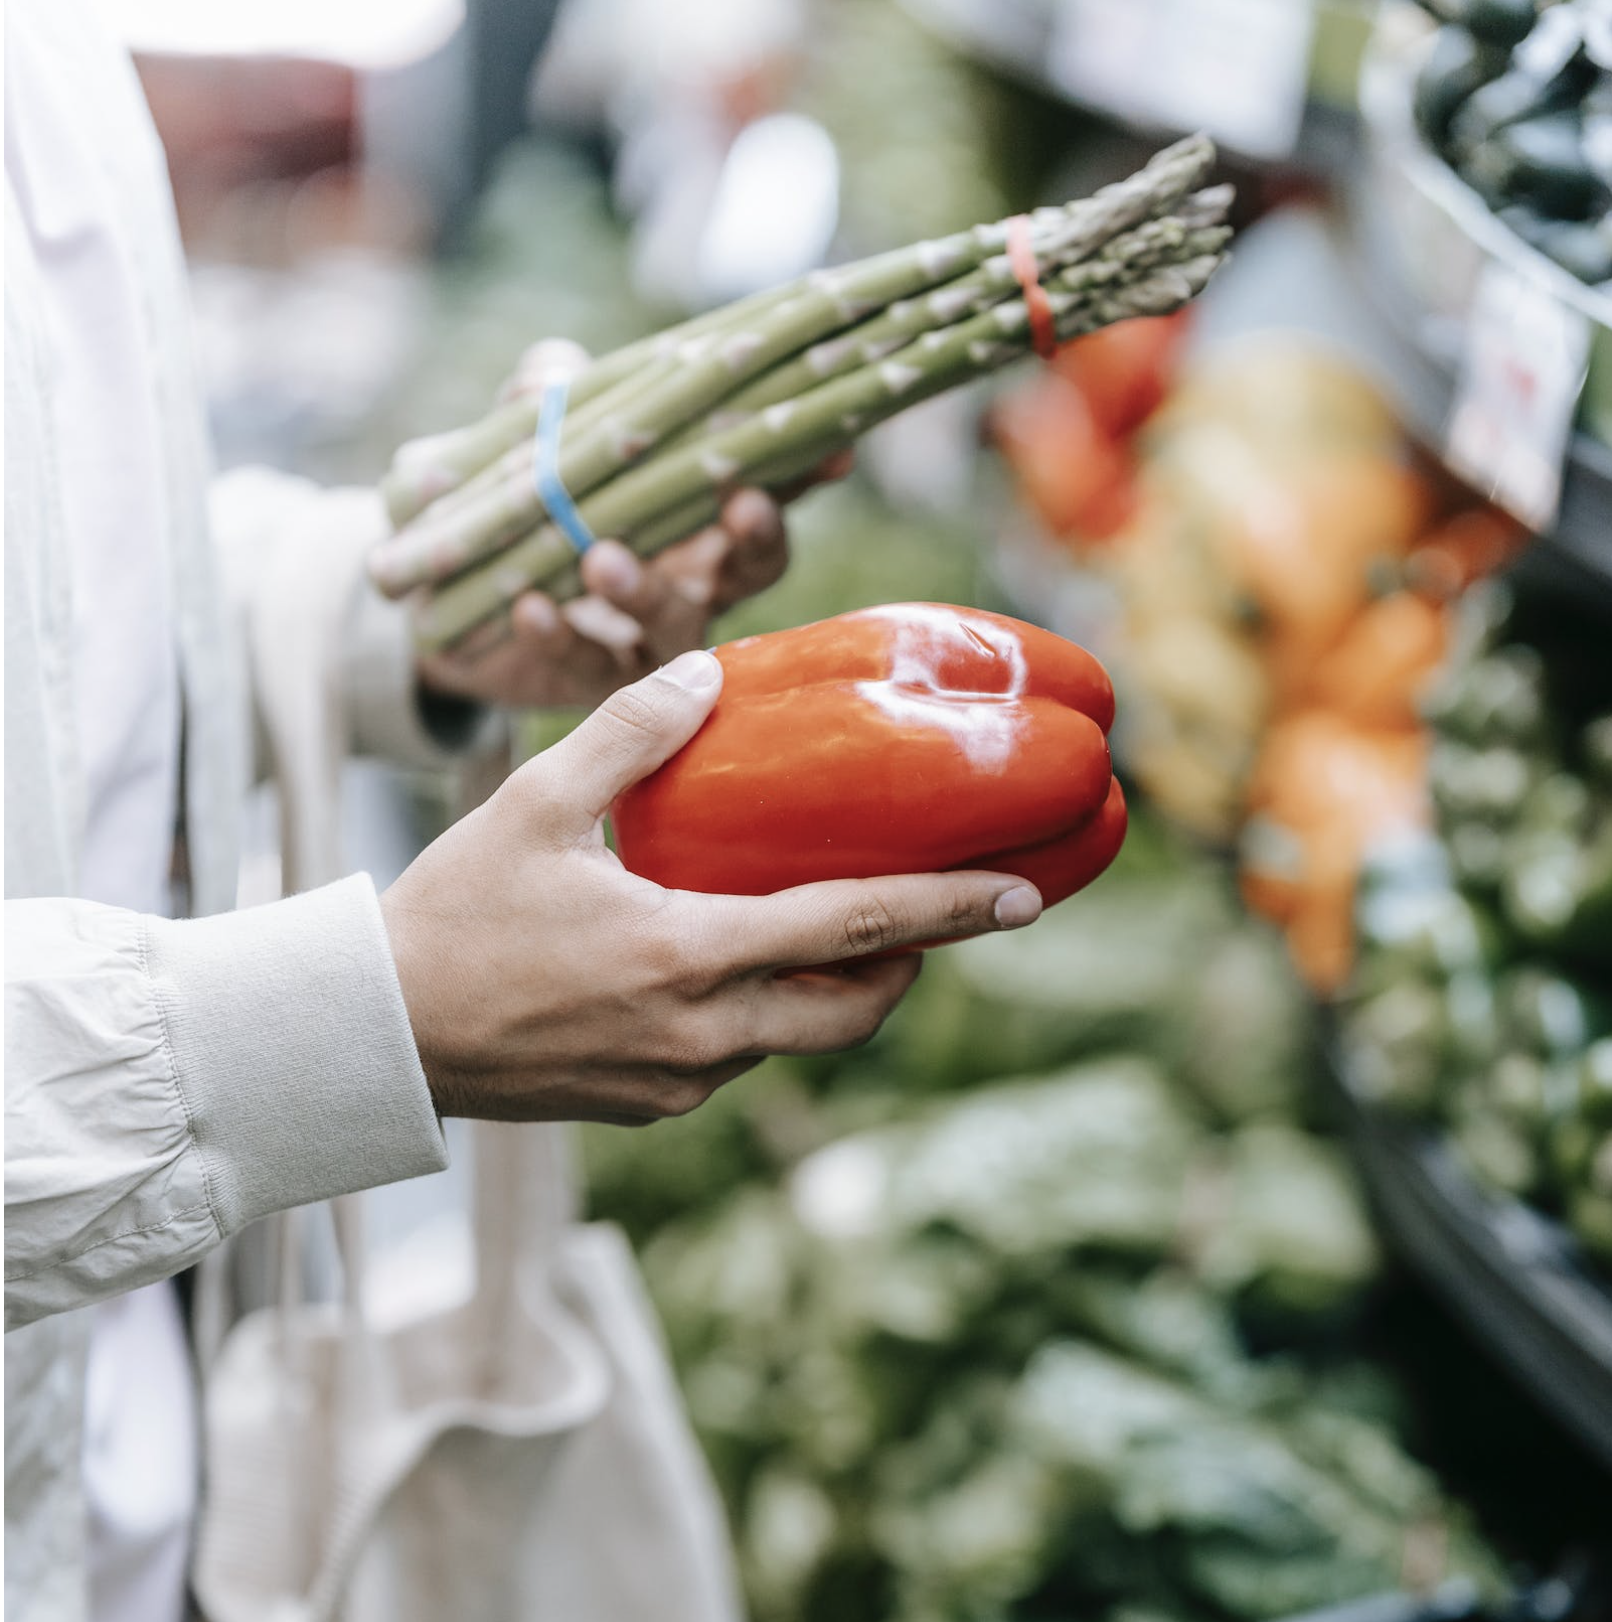 Choosing to purchase fresh fruits & veggies in season can help see money while grocery shopping.